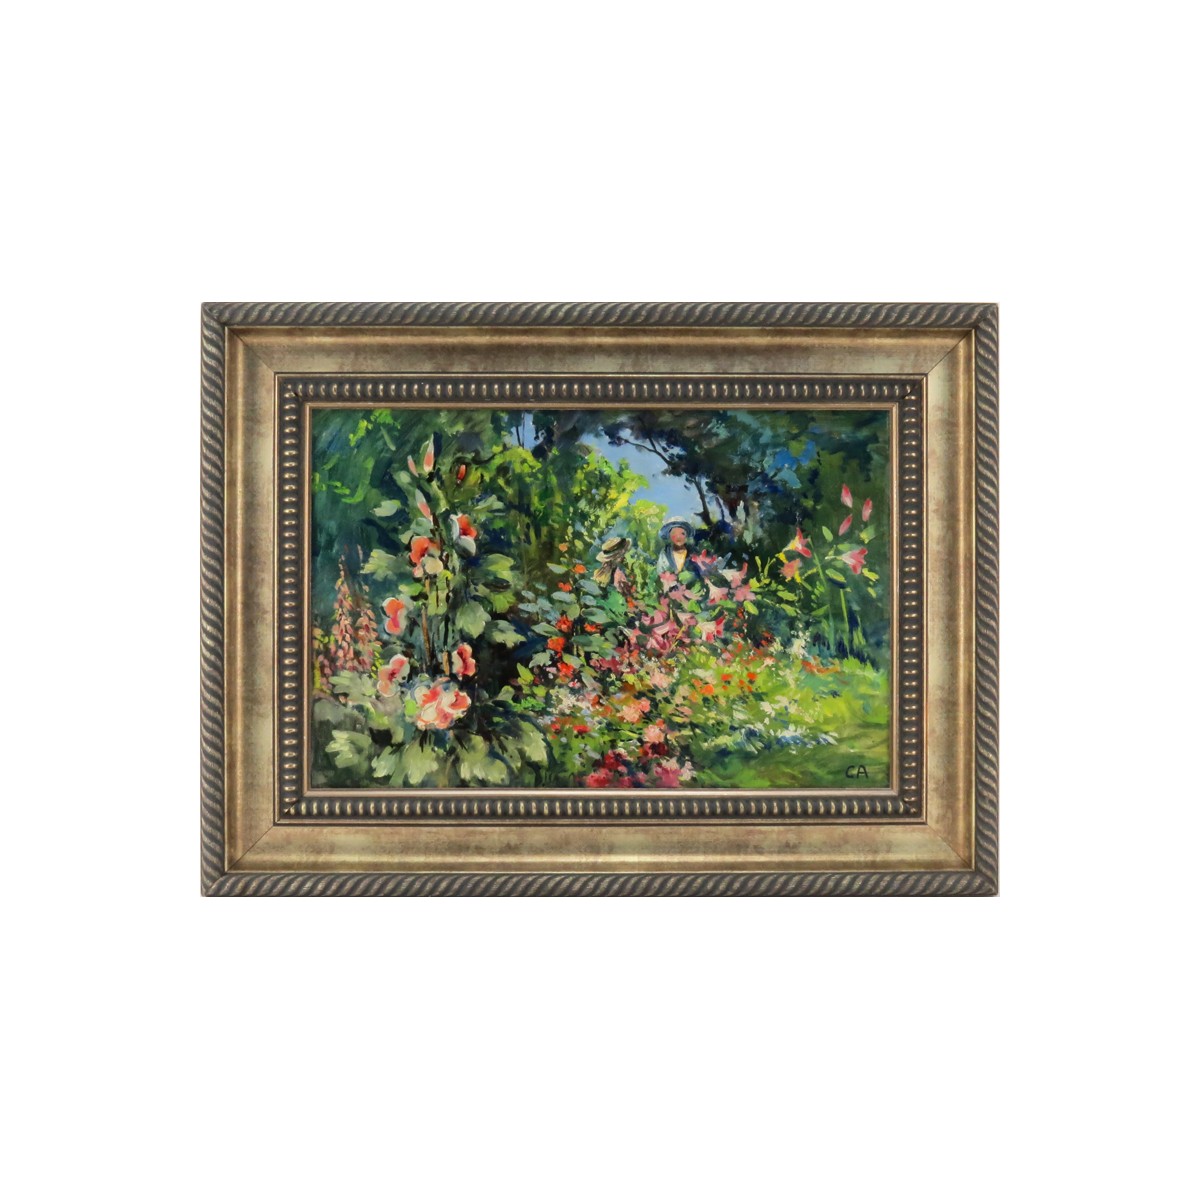 20th Century Oil on Canvas, Landscape with Flowers. Artist monogr